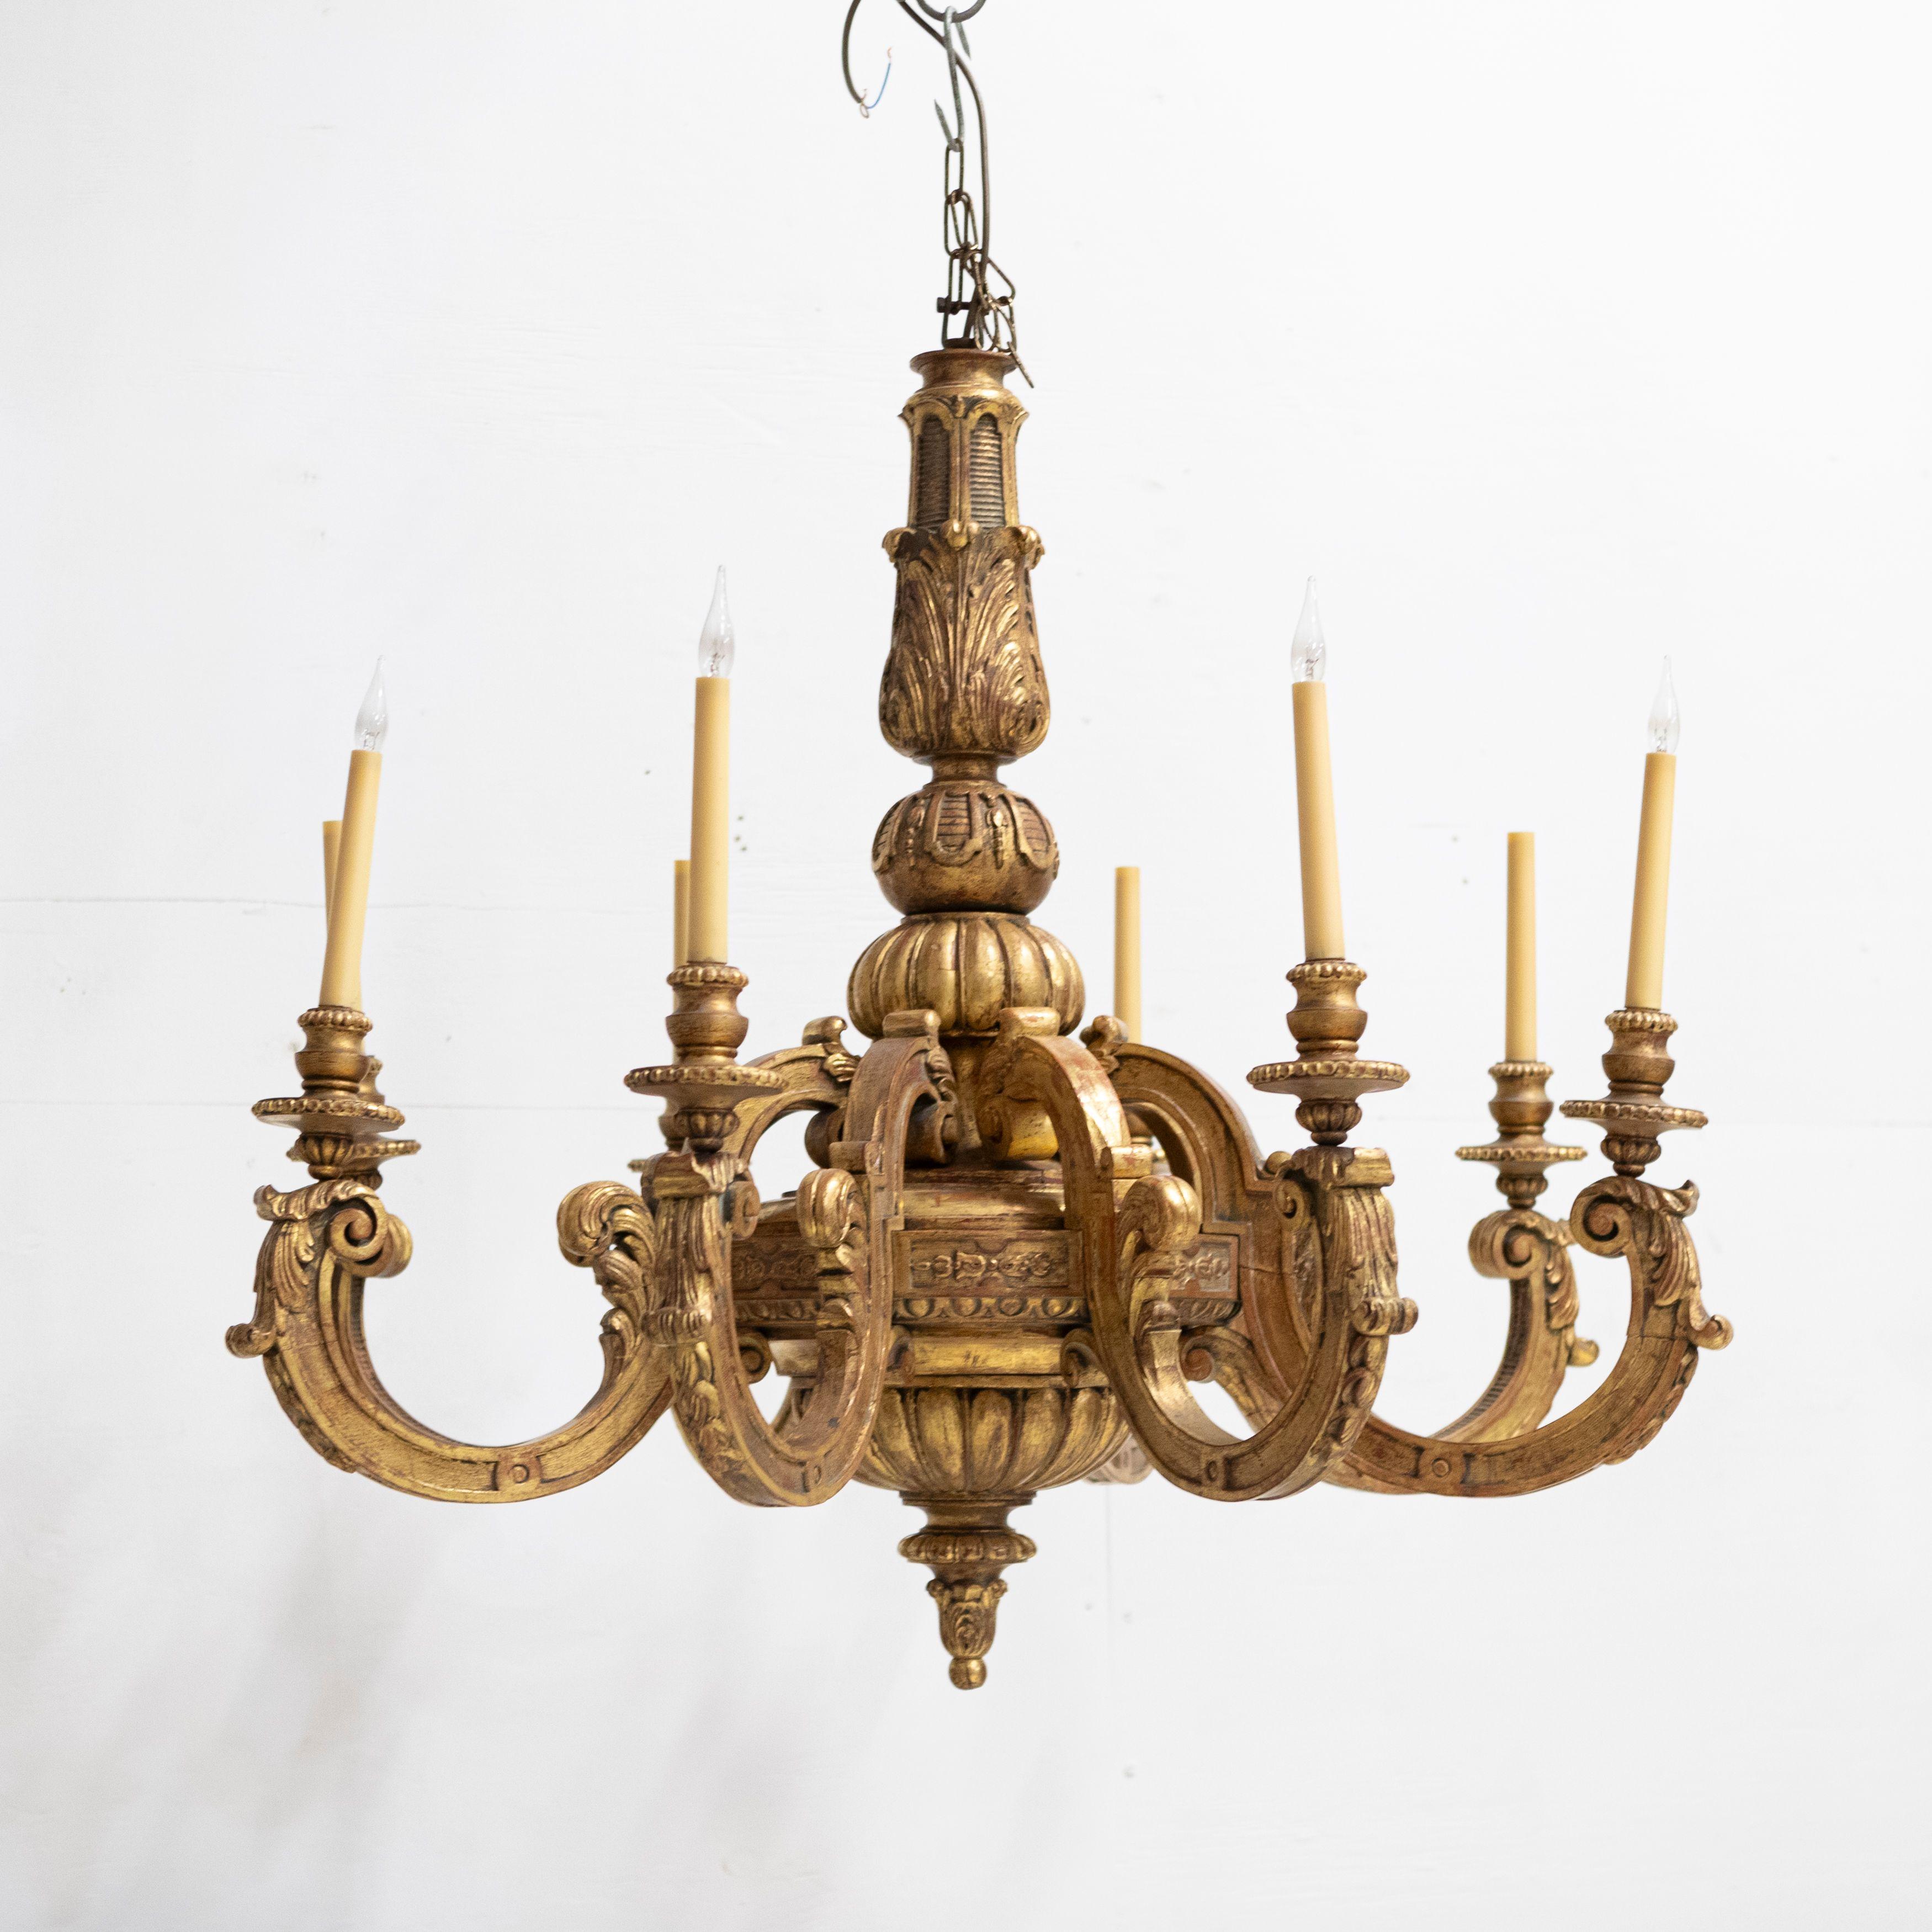 Large Antique Italian Giltwood 19th Century 8 Arm Chandelier For Sale 10